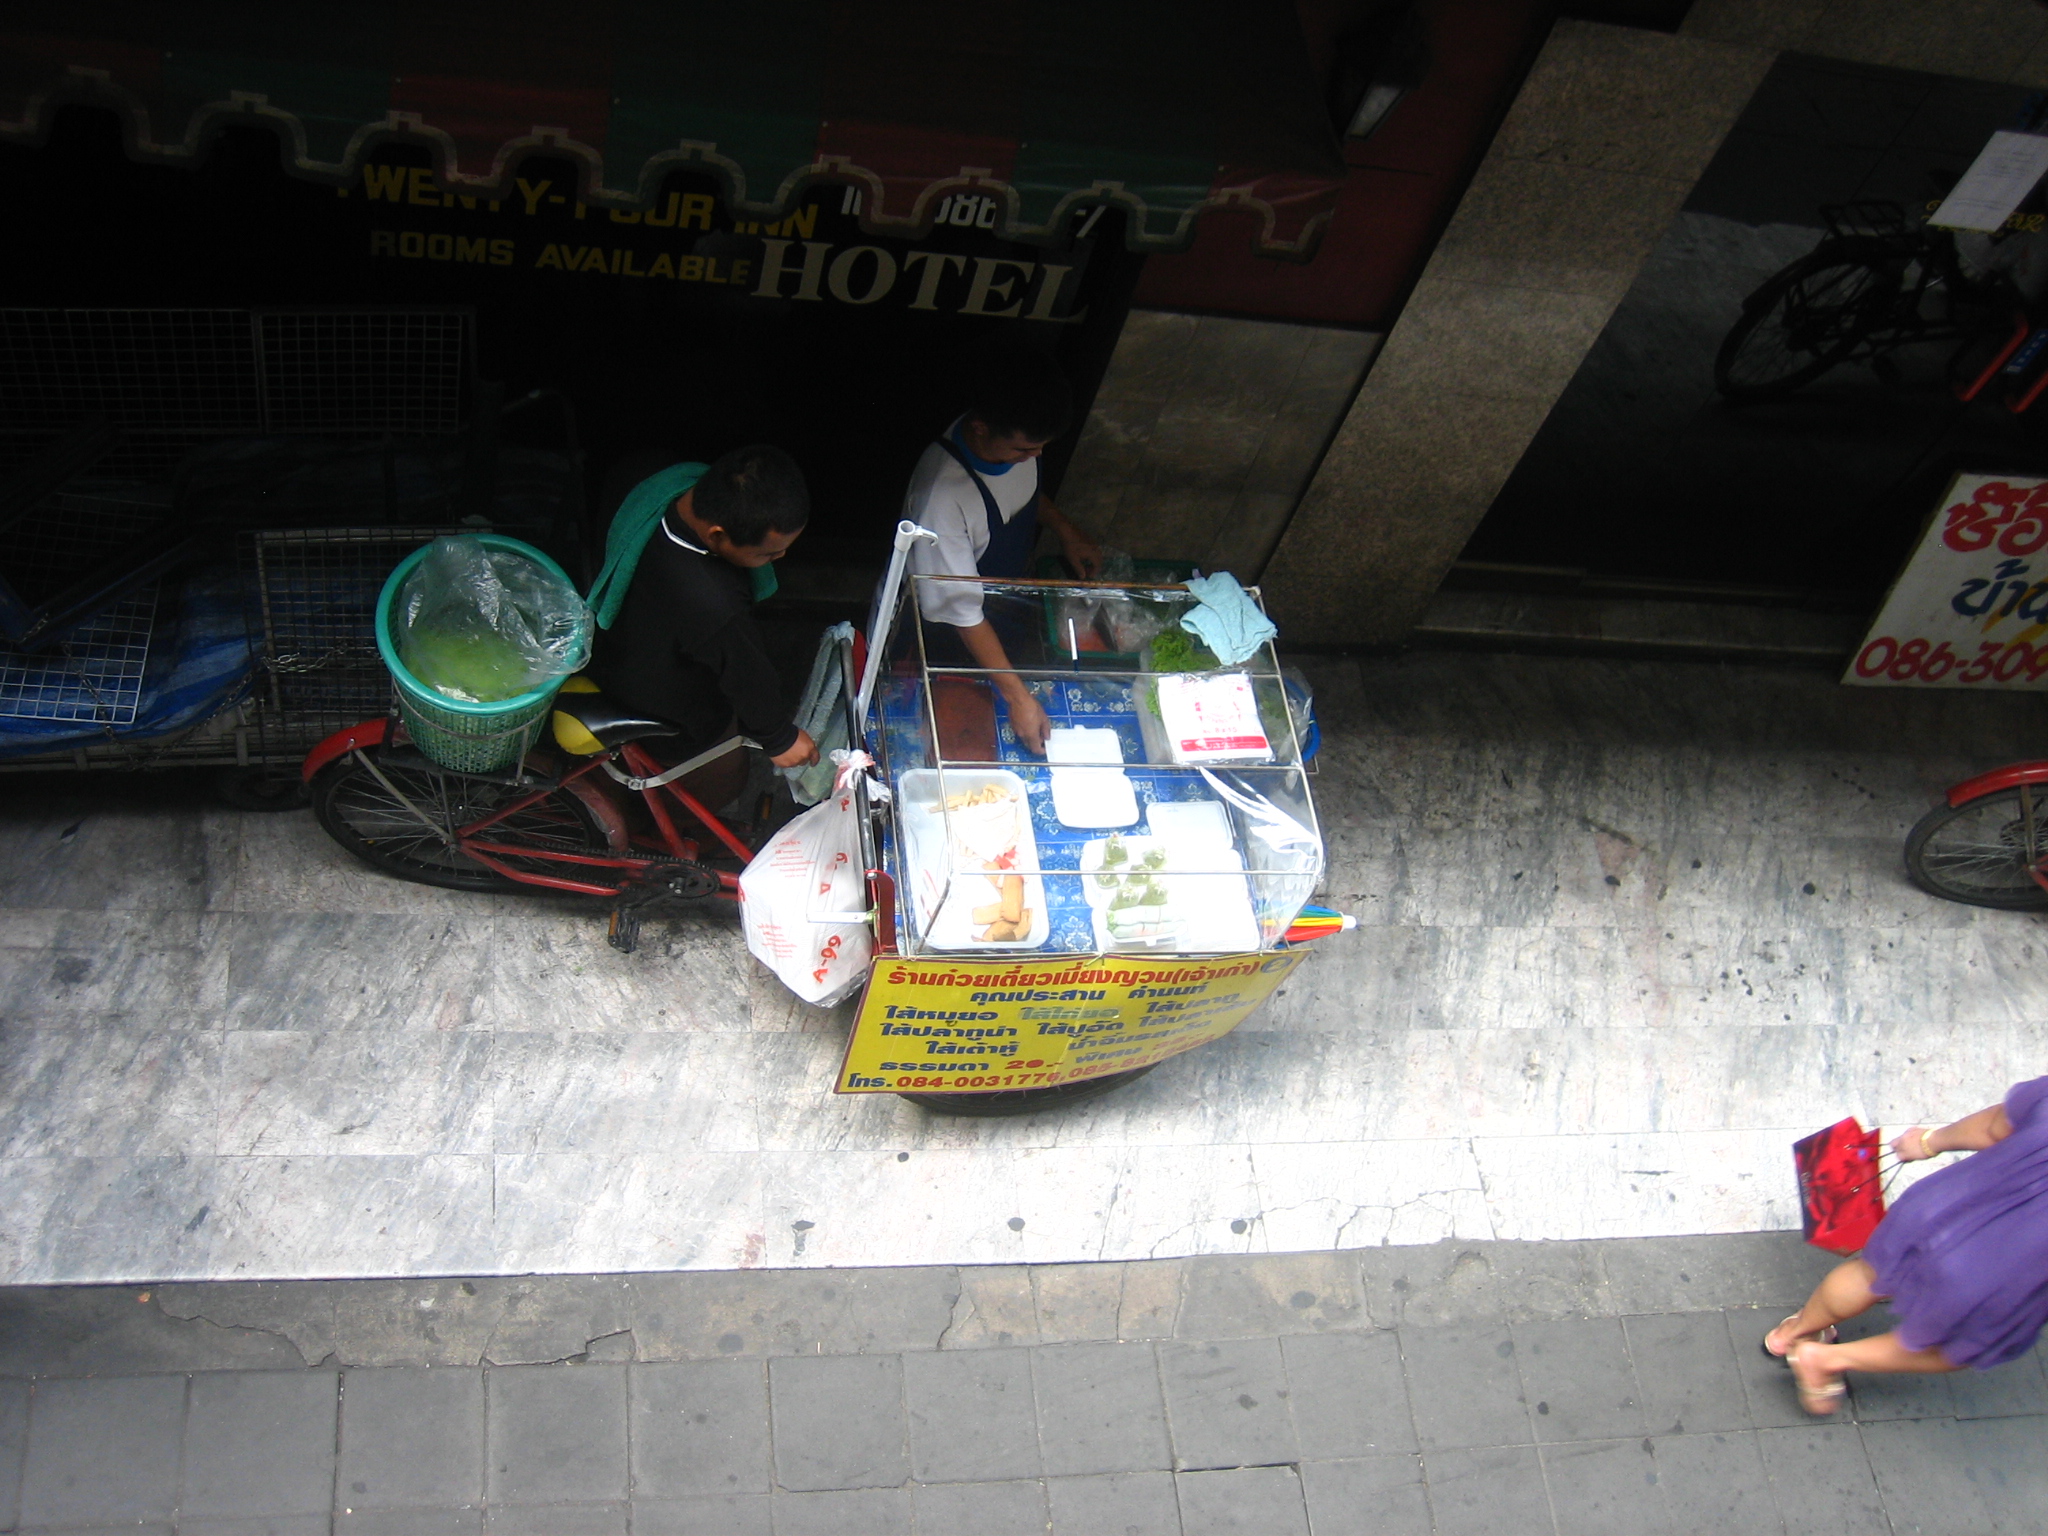 three people are walking near a cart with several containers on top